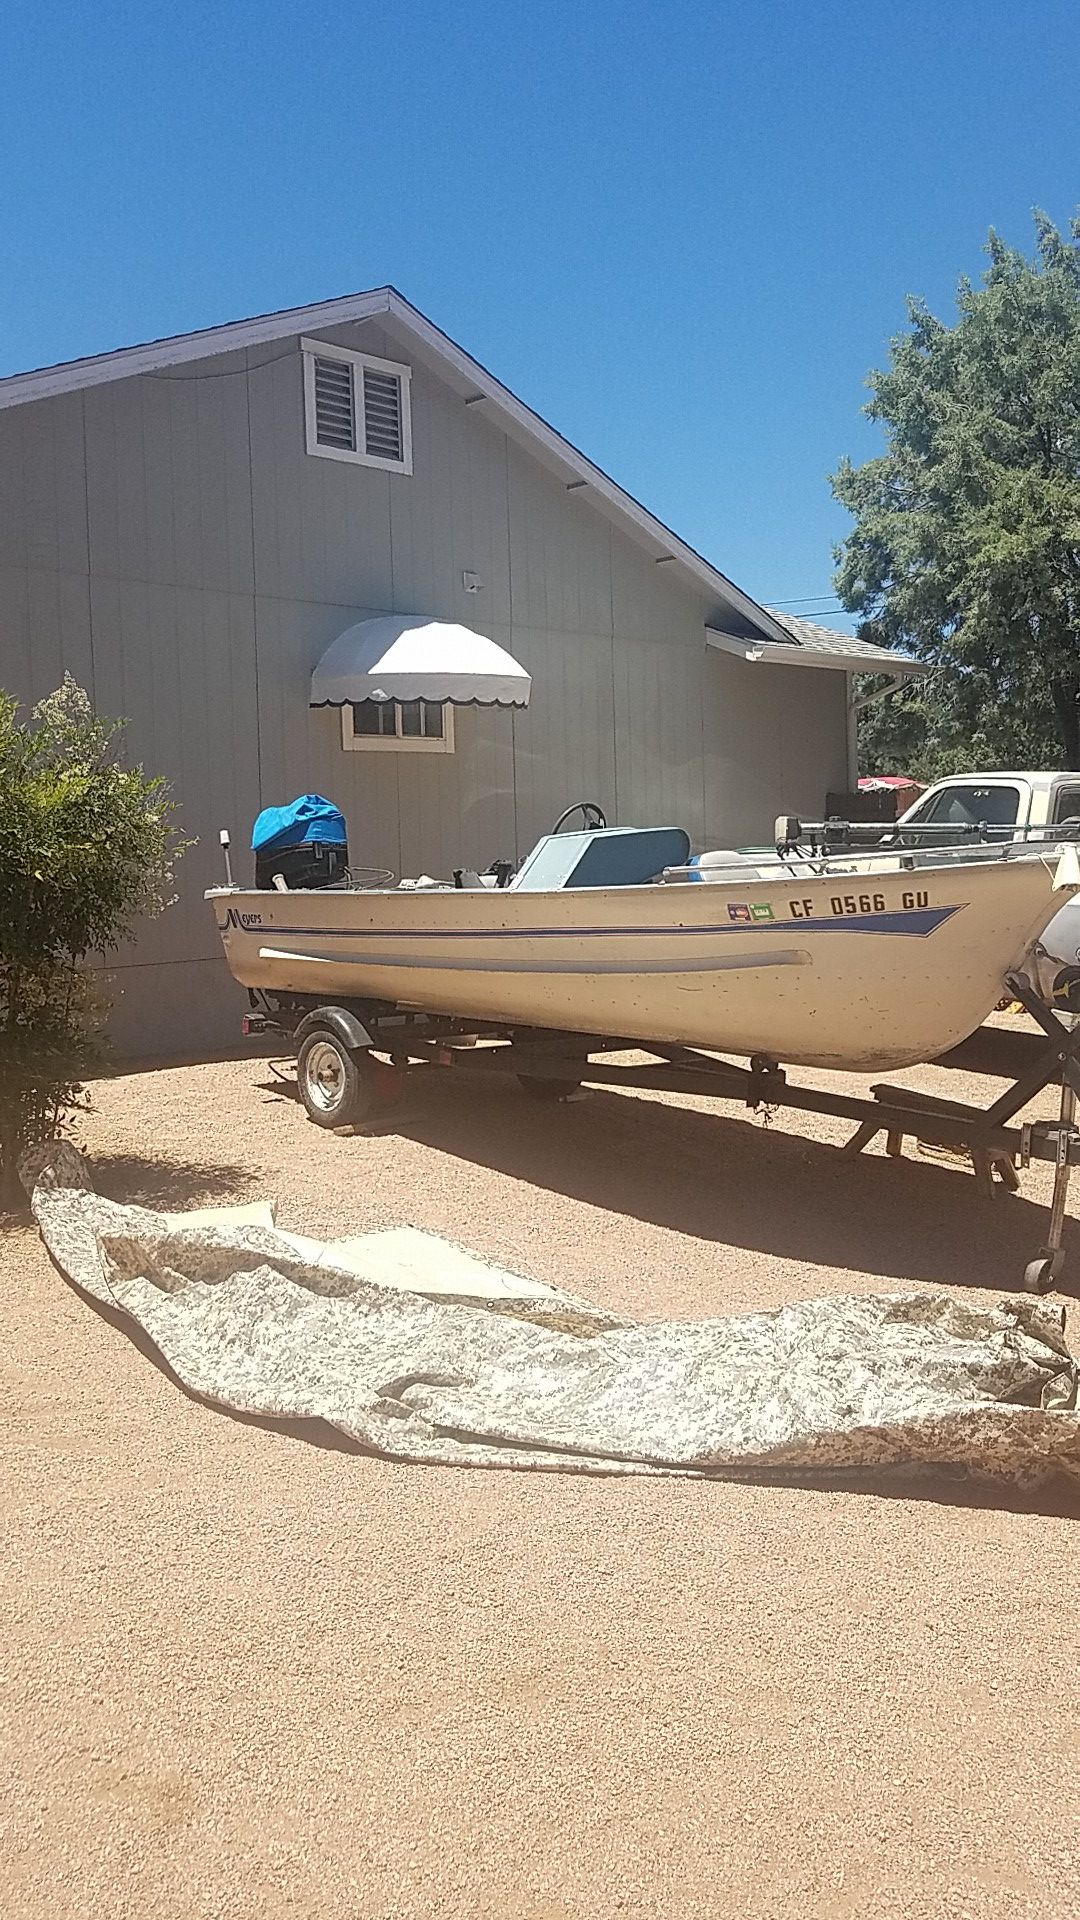 1979 meyer alum. boat w 2003 50 hp outboard..would sell motor separate